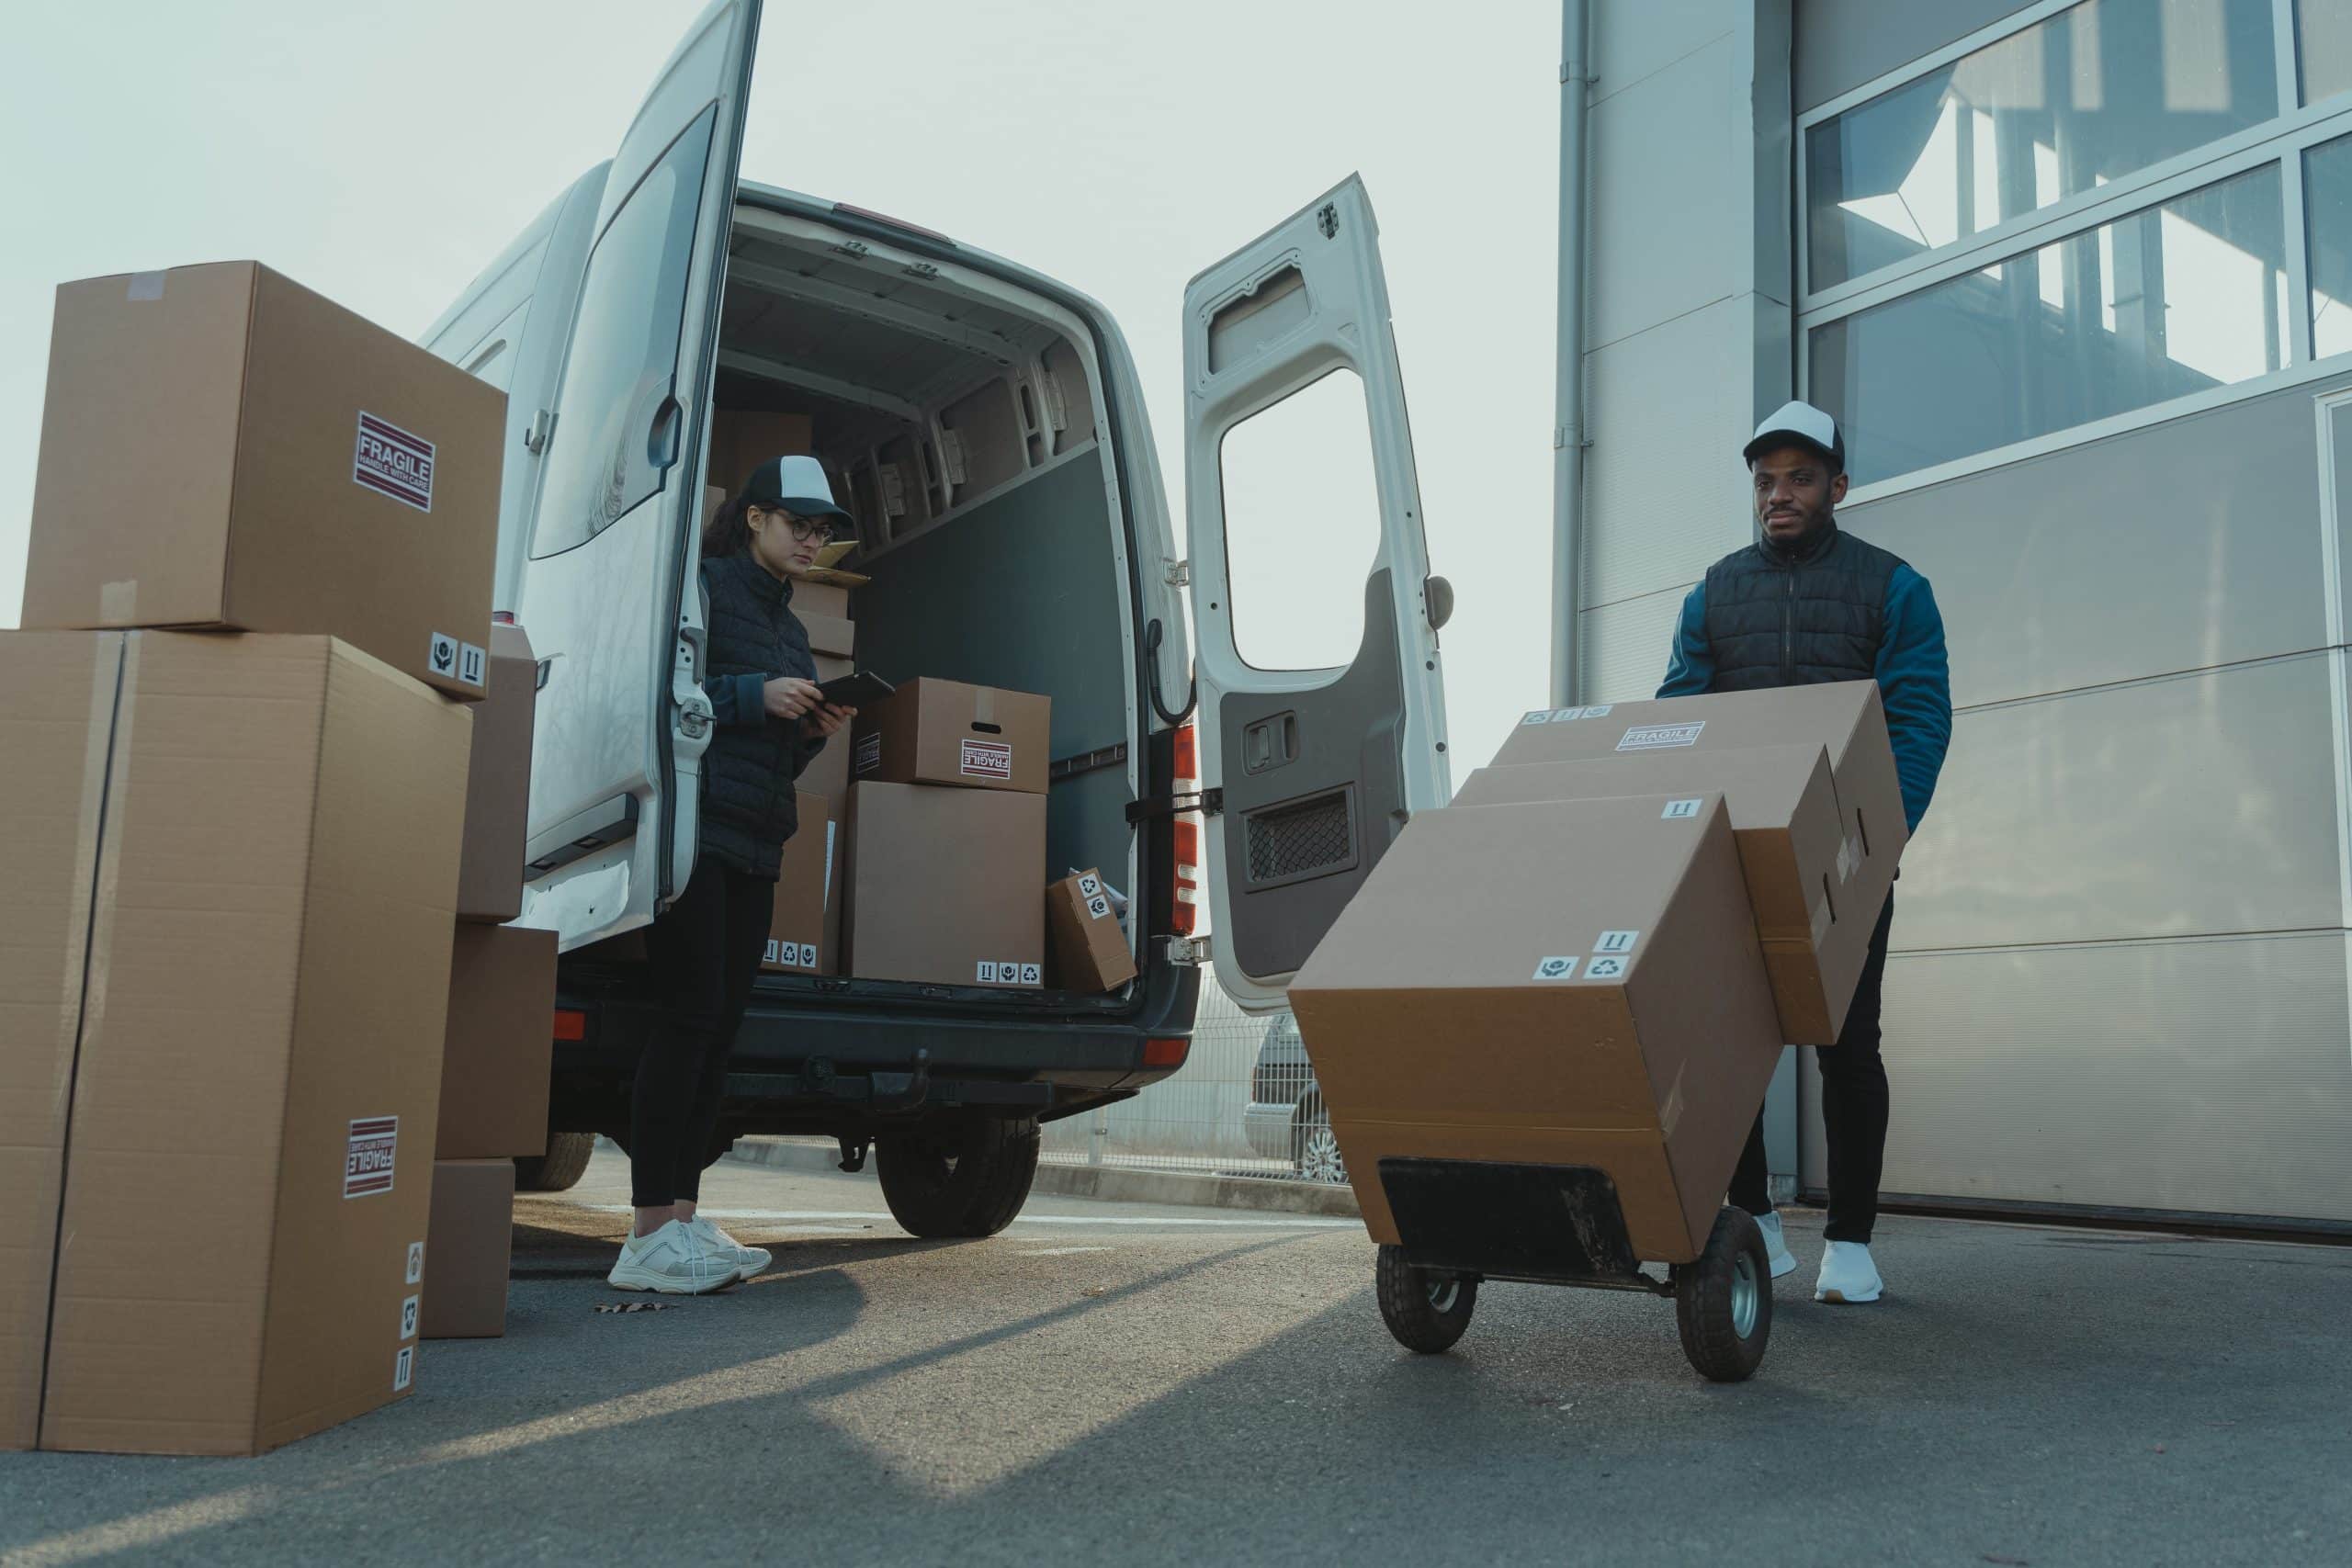 Cargo Van Delivery Job in Canada: Exploring Earning Potential and Opportunities